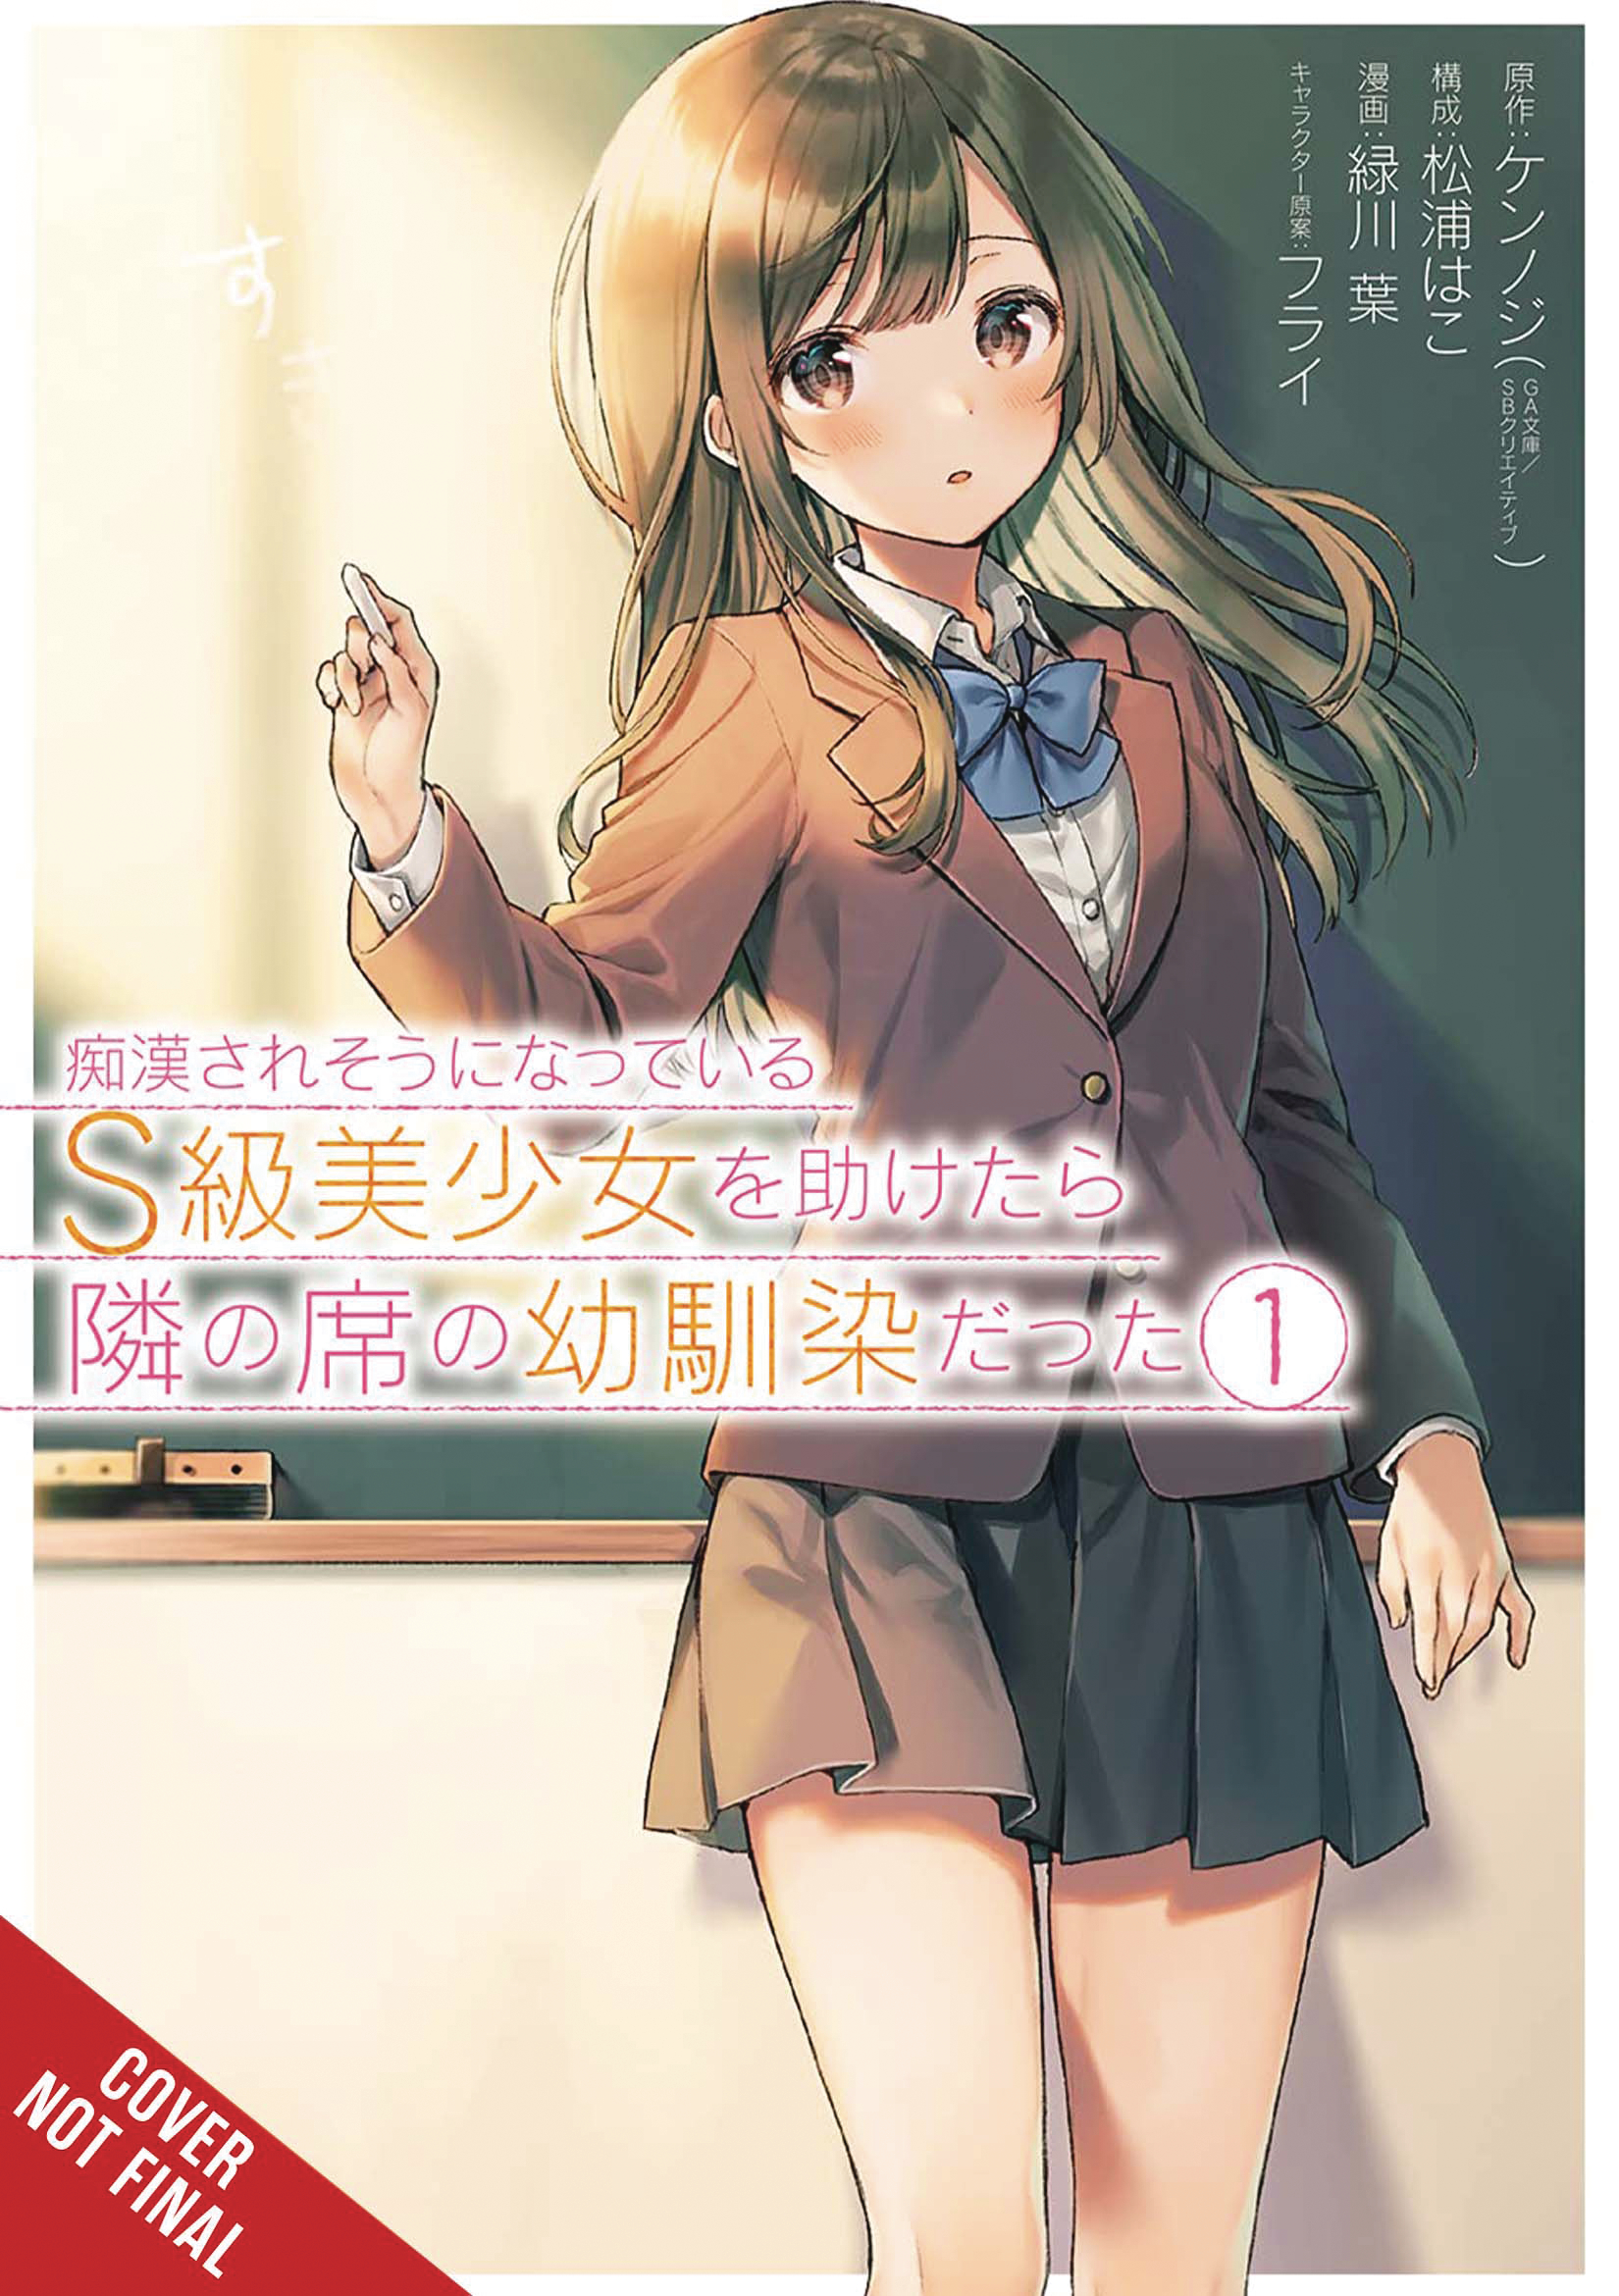 Girl Saved On Train Turned Out Childhood Friend Graphic Novel Volume 1